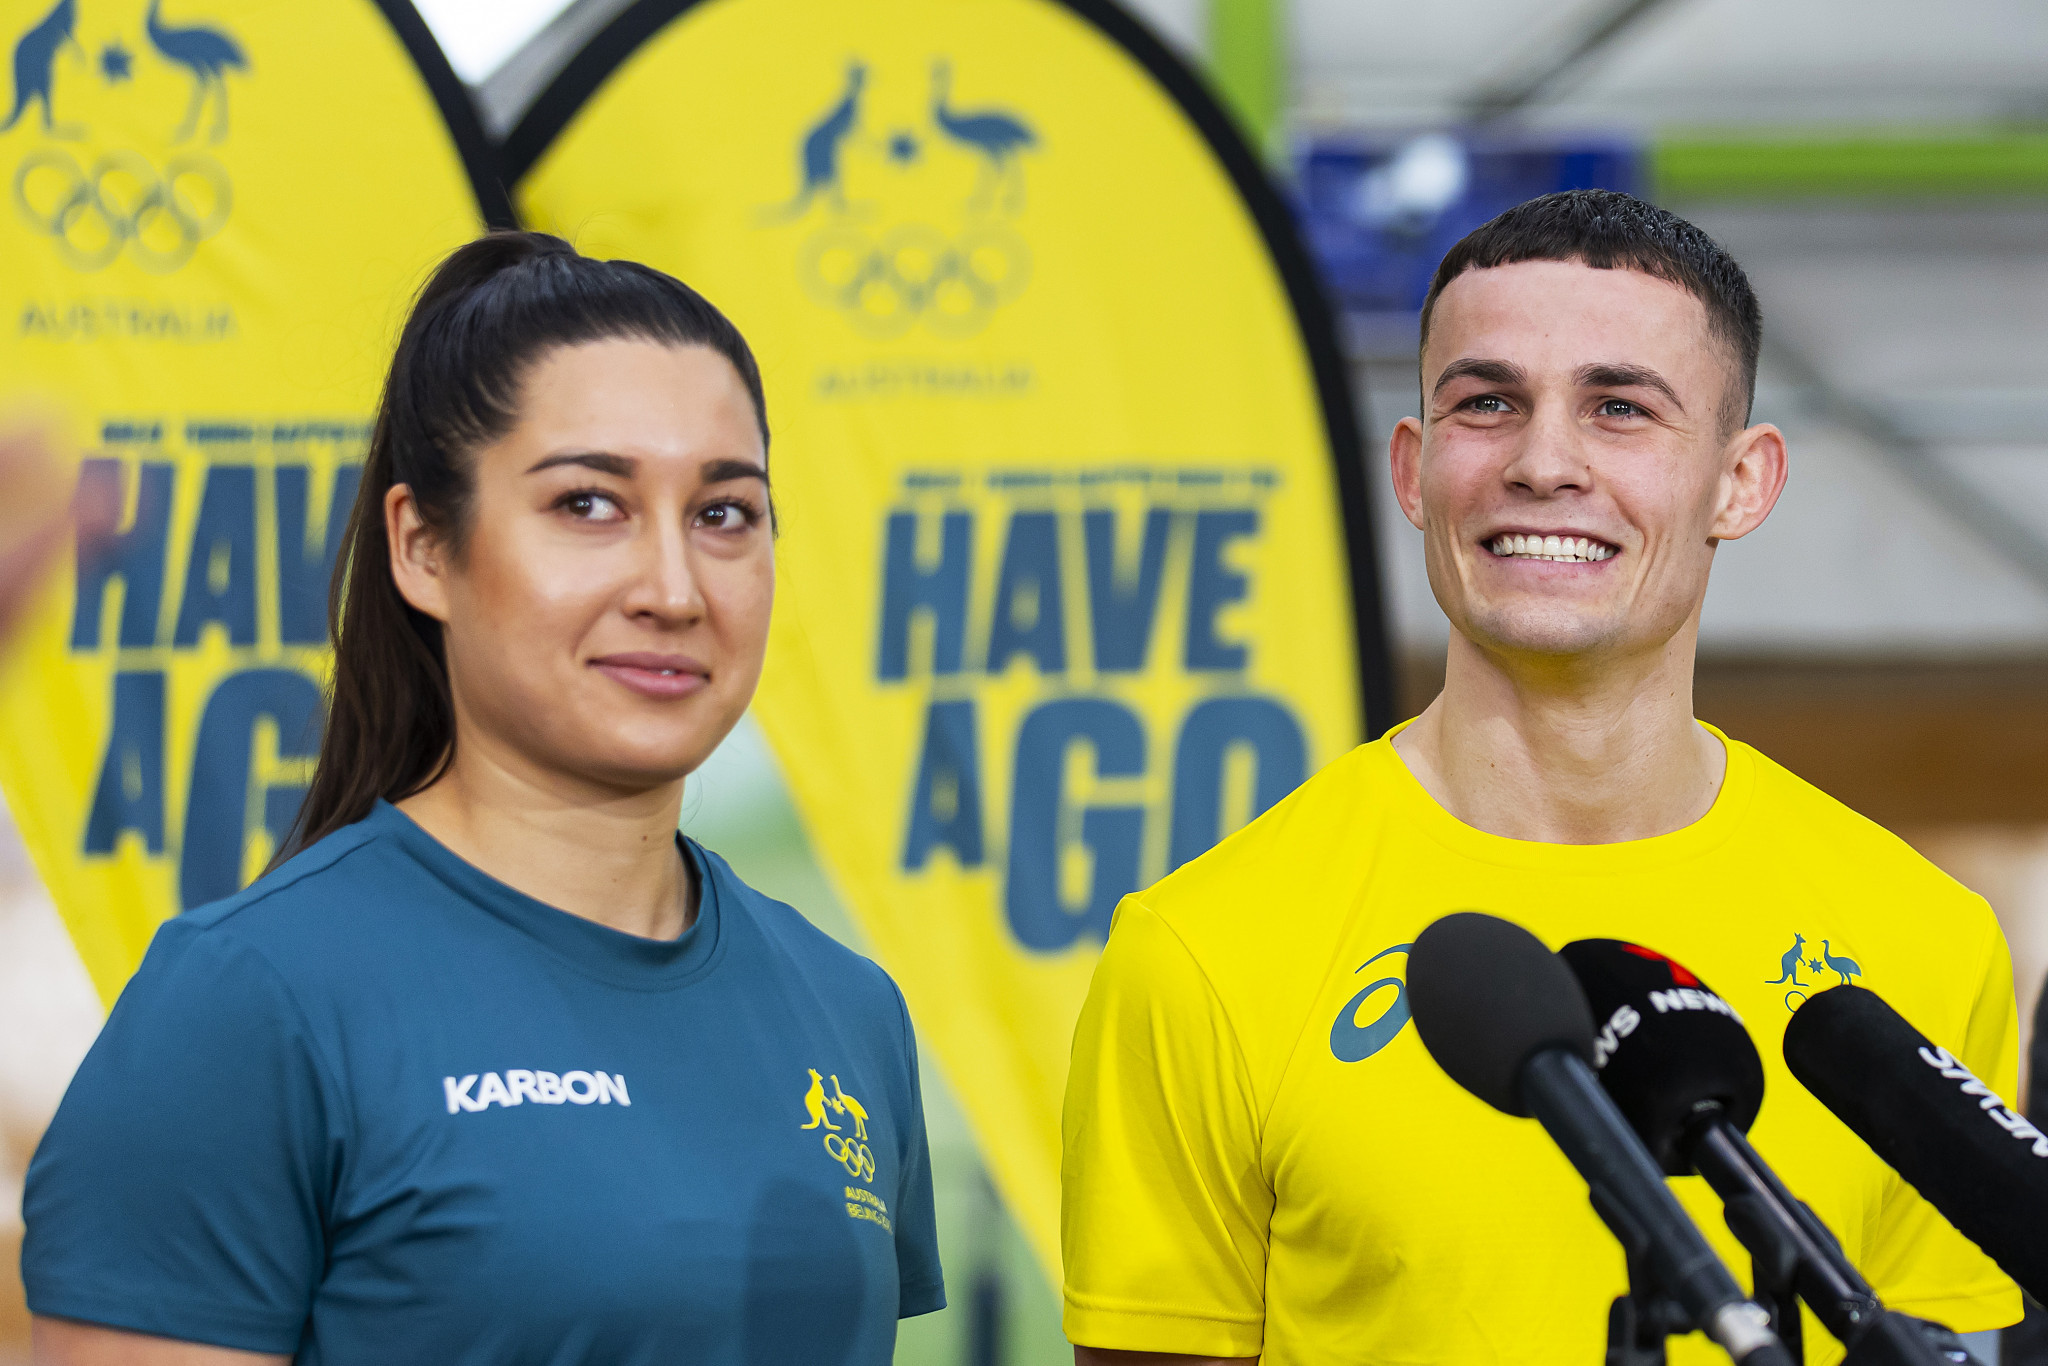 Olympic boxing bronze medallist Harry Garside, right, and snowboarder Belle Brockhoff, left, helped launch the AOC's Have a Go Month ©Getty Images